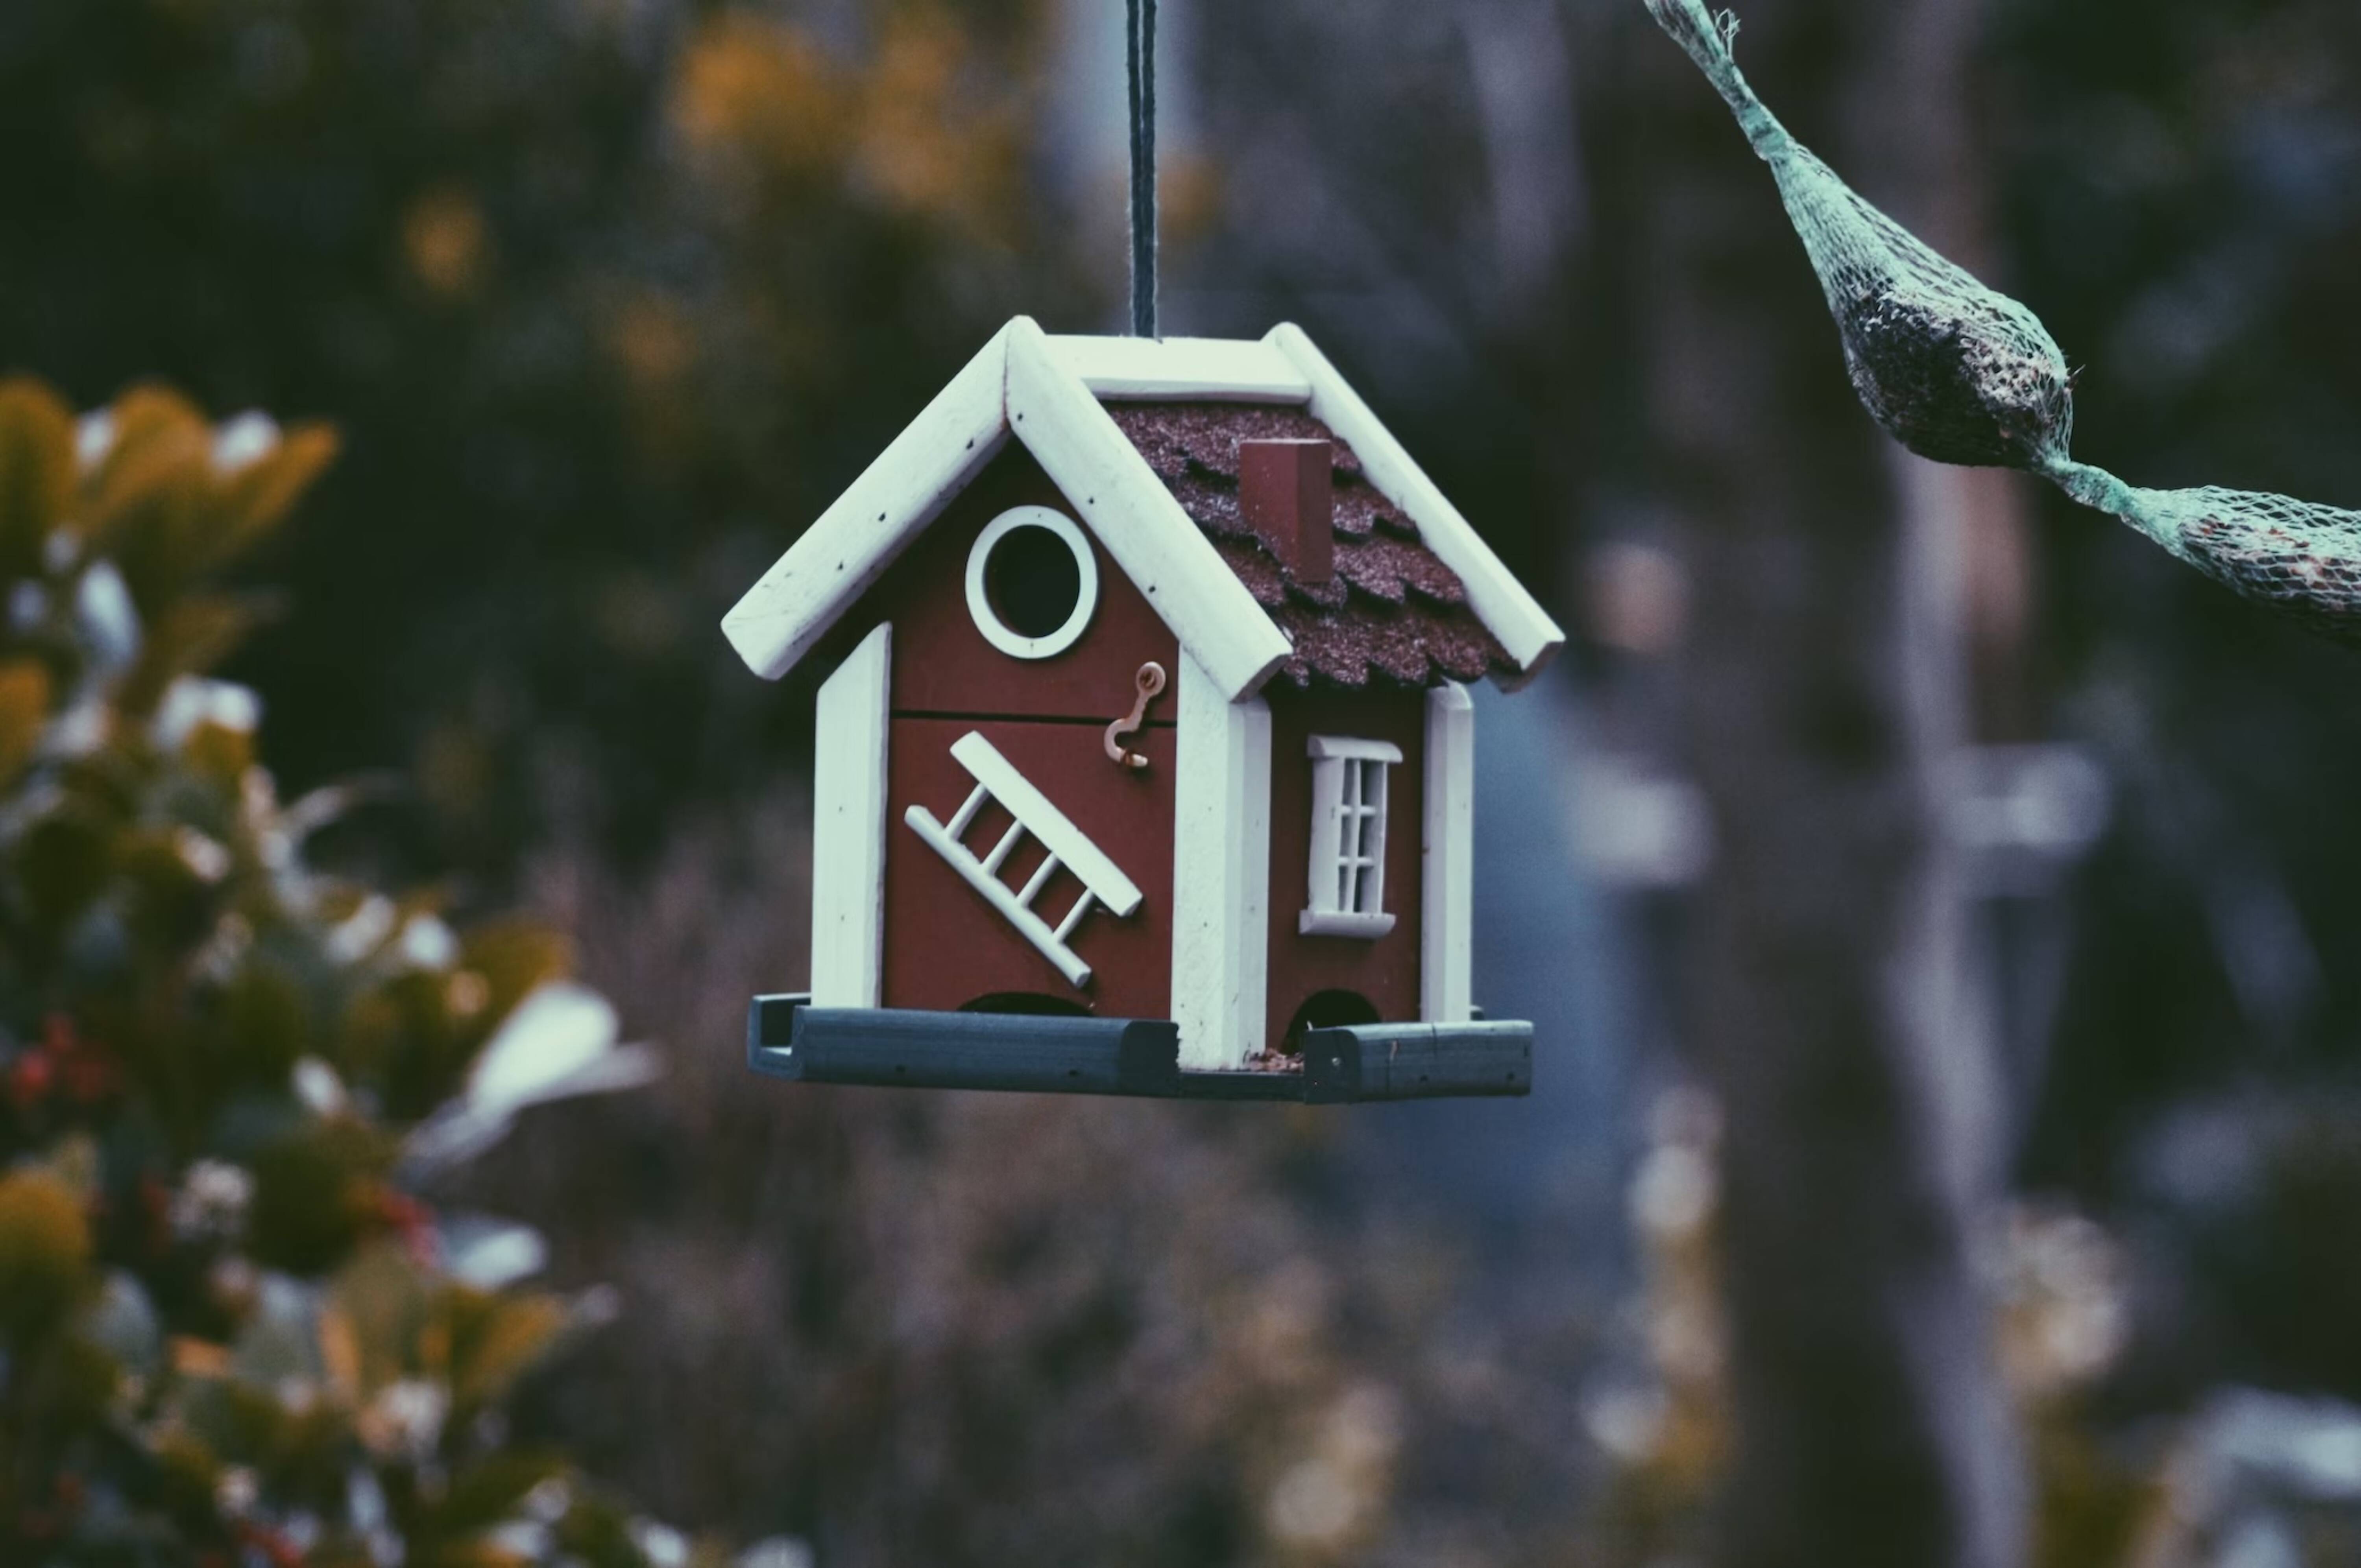 A miniature house ornament hanging from a tree.